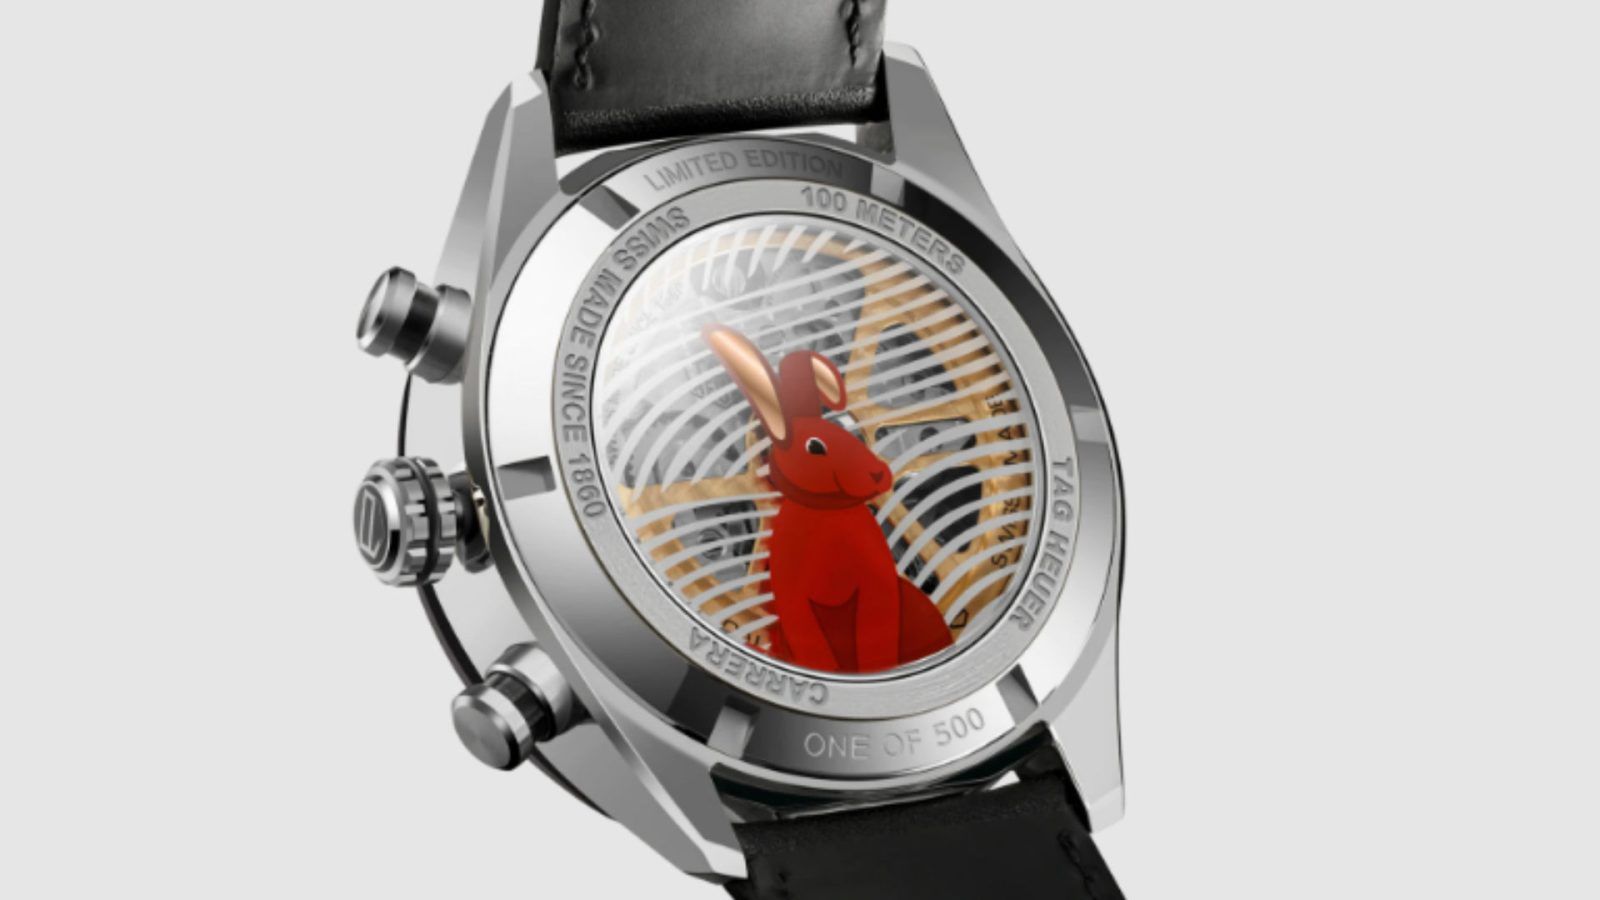 Alcatraz Island inval pack Limited-edition Tag Heuer watch launched for 'Year Of The Rabbit'